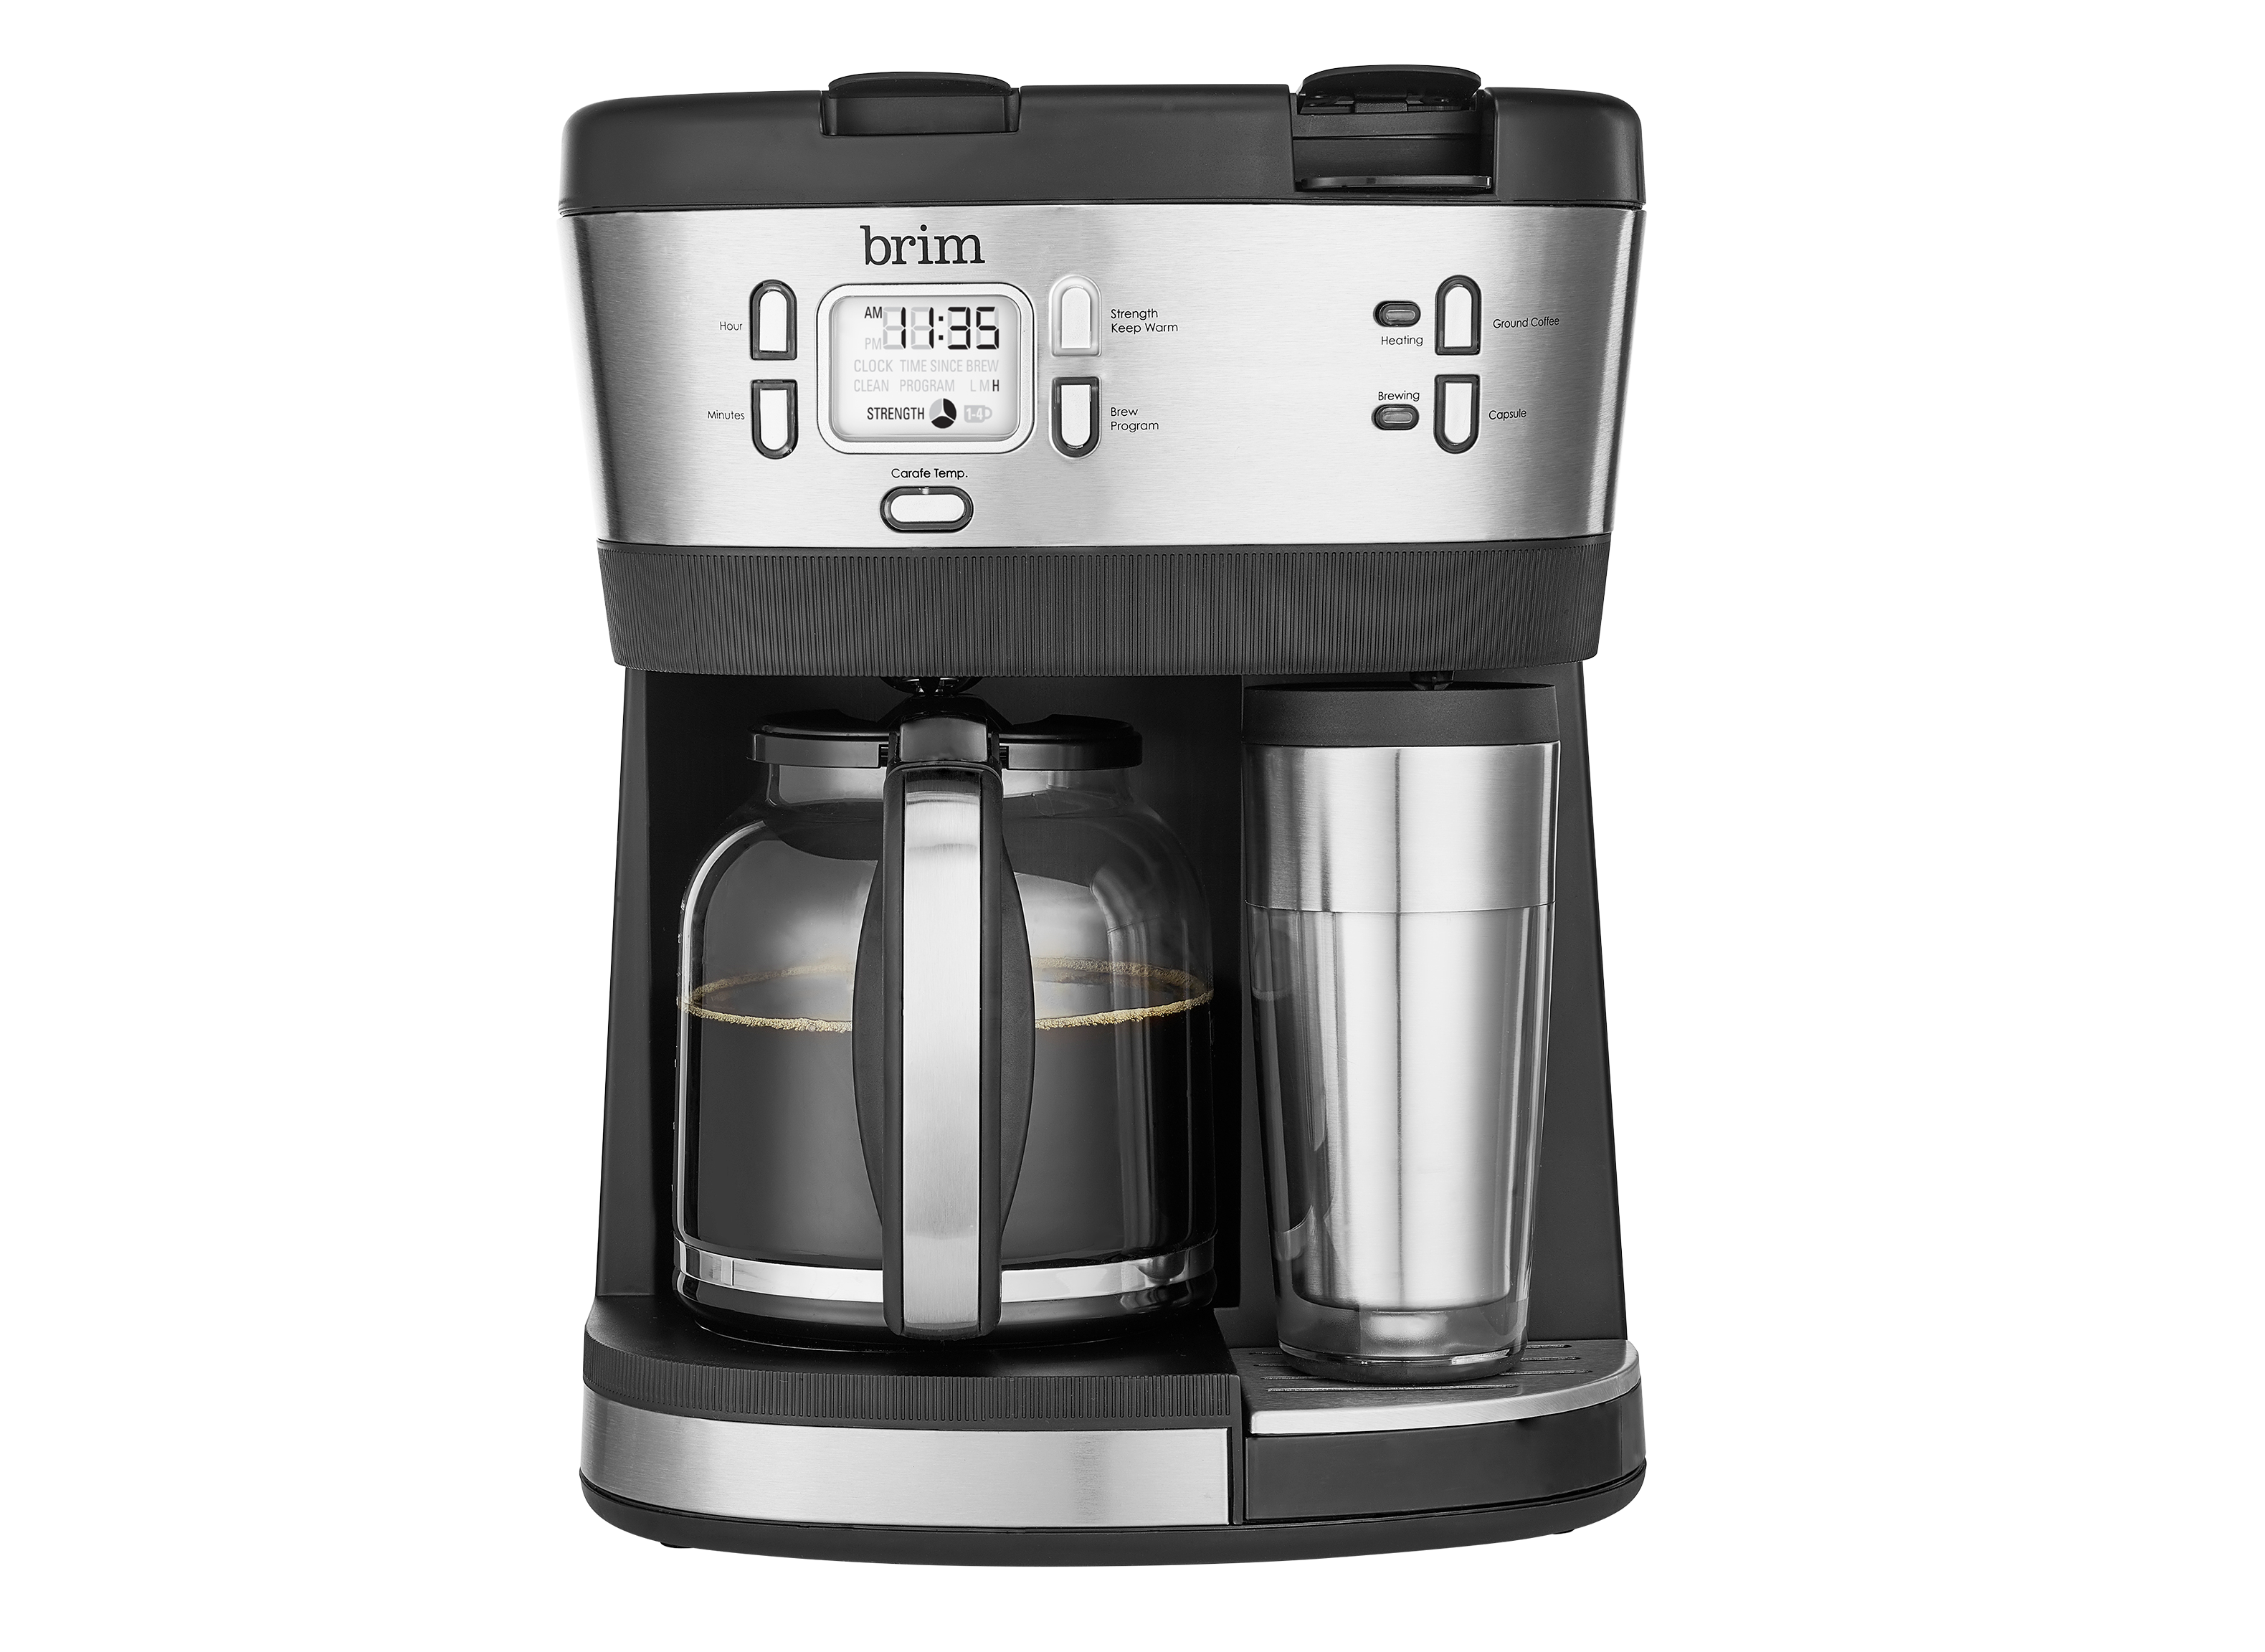 Brim Triple Brew 12-Cup 50017 Coffee Maker Review - Consumer Reports